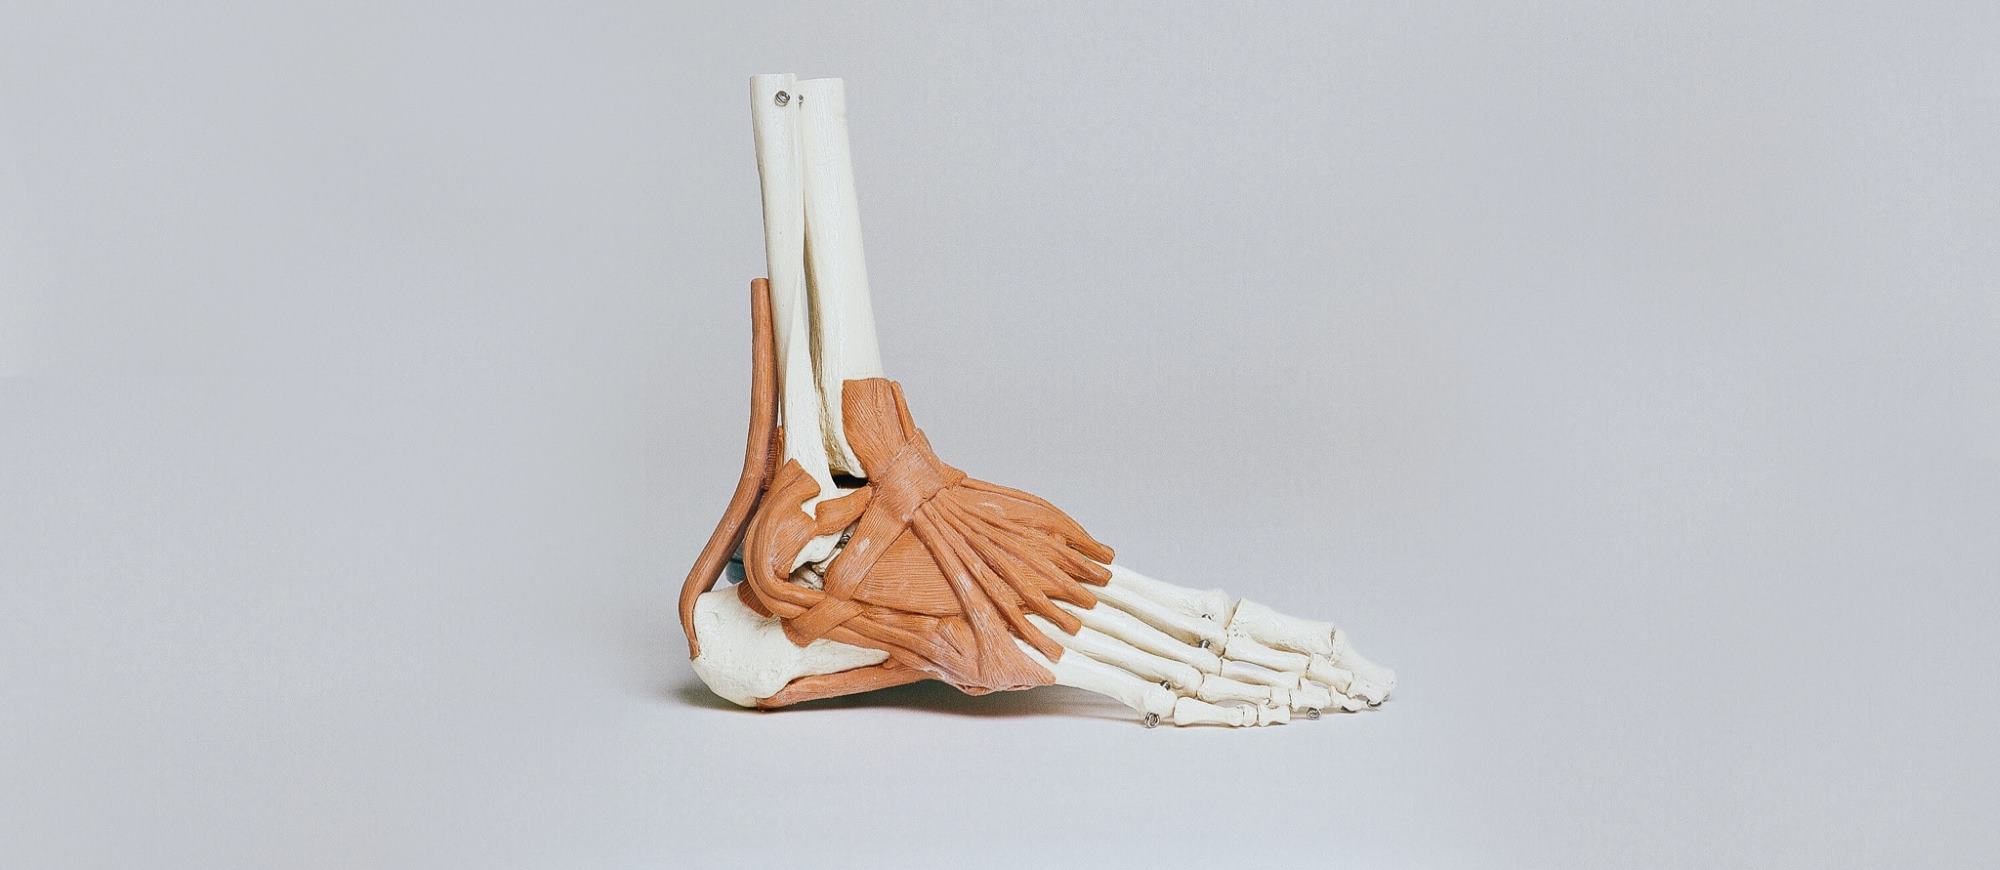 Anatomical, skeletal view of foot and ankle